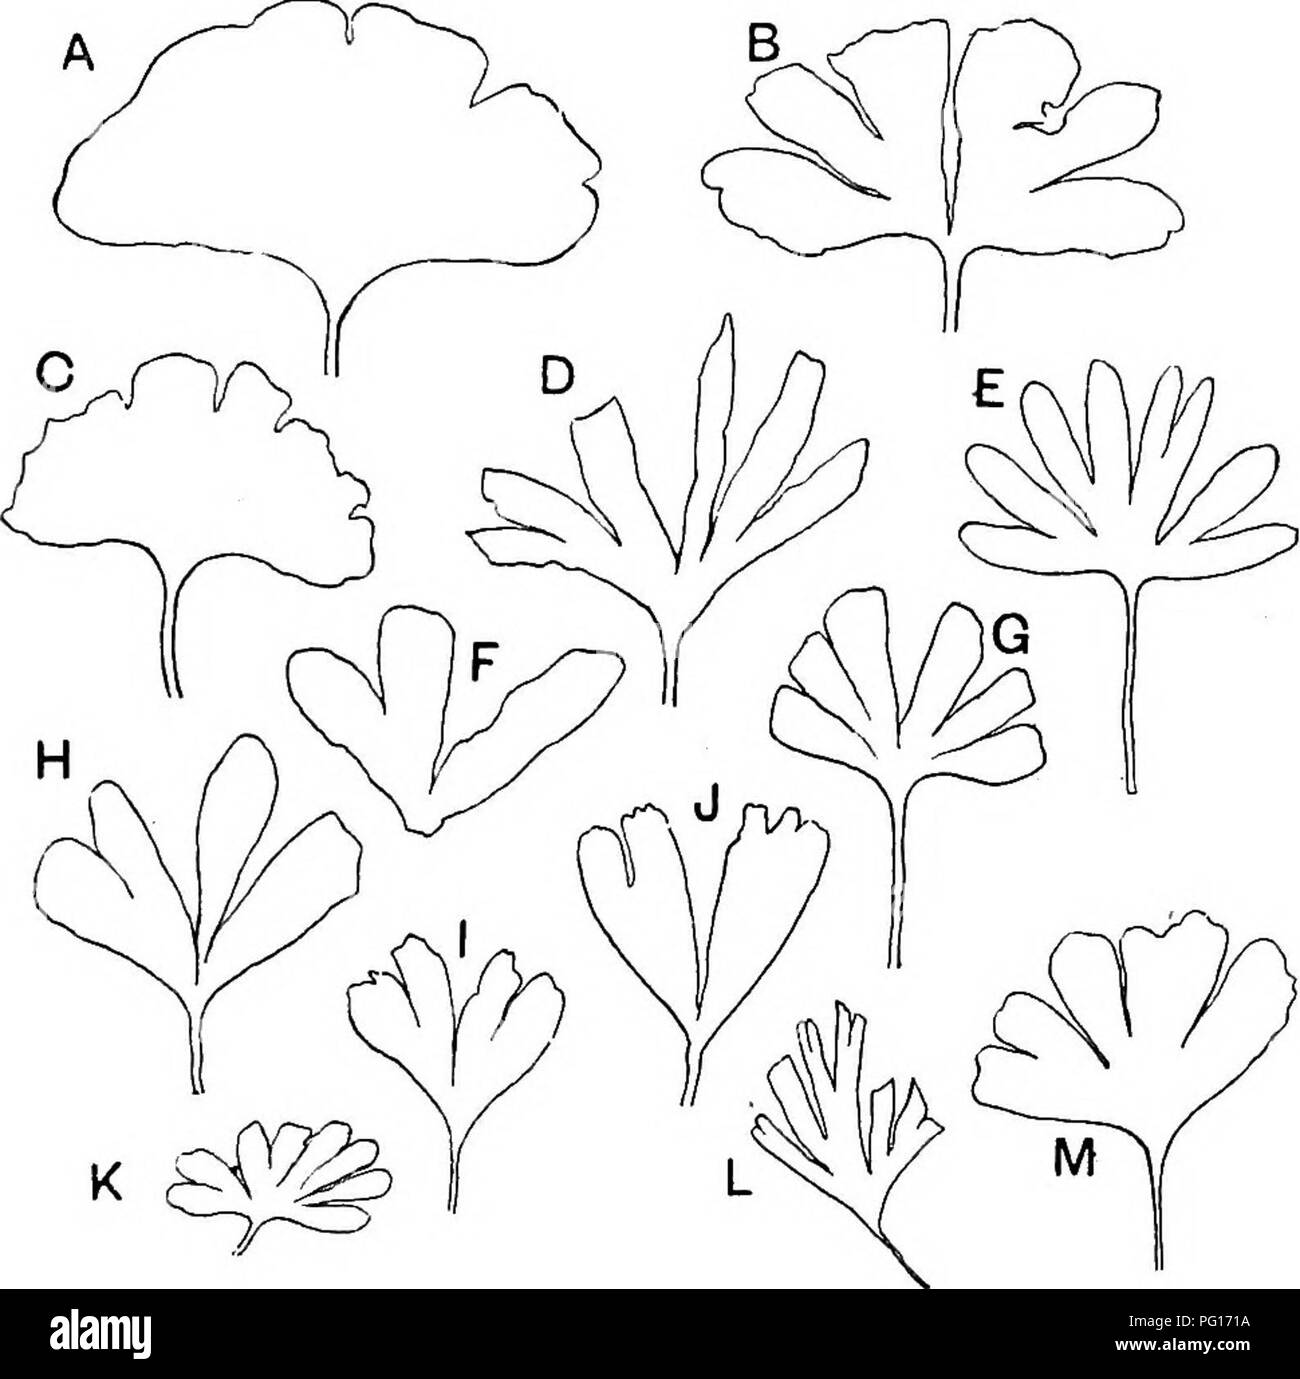 . Fossil plants : for students of botany and geology . Paleobotany. XL] GINKGOITES 17 The leaves of Ginlcgo digitata have a long slender petiole (fig. 634); the lamina is semiorbicular or obcuneate, entire, or more or less deeply divided into equal lobes, or irregularly divided into several. Fig. 635. Ginkgoites. (^ nat. size.) A. Ginkgoites adiantoides. Tertiary, Island of Mull. B. G. pluripartita, Wealden, North Germany (after Sohenk). C. G. digitata, Jurassic, Japan (after Yokoyama). D. G. digitata var. Huttoni, Jurassic, Australia (after Stirling). E. G. sibirica, Jurassic, Siberia (after  Stock Photo